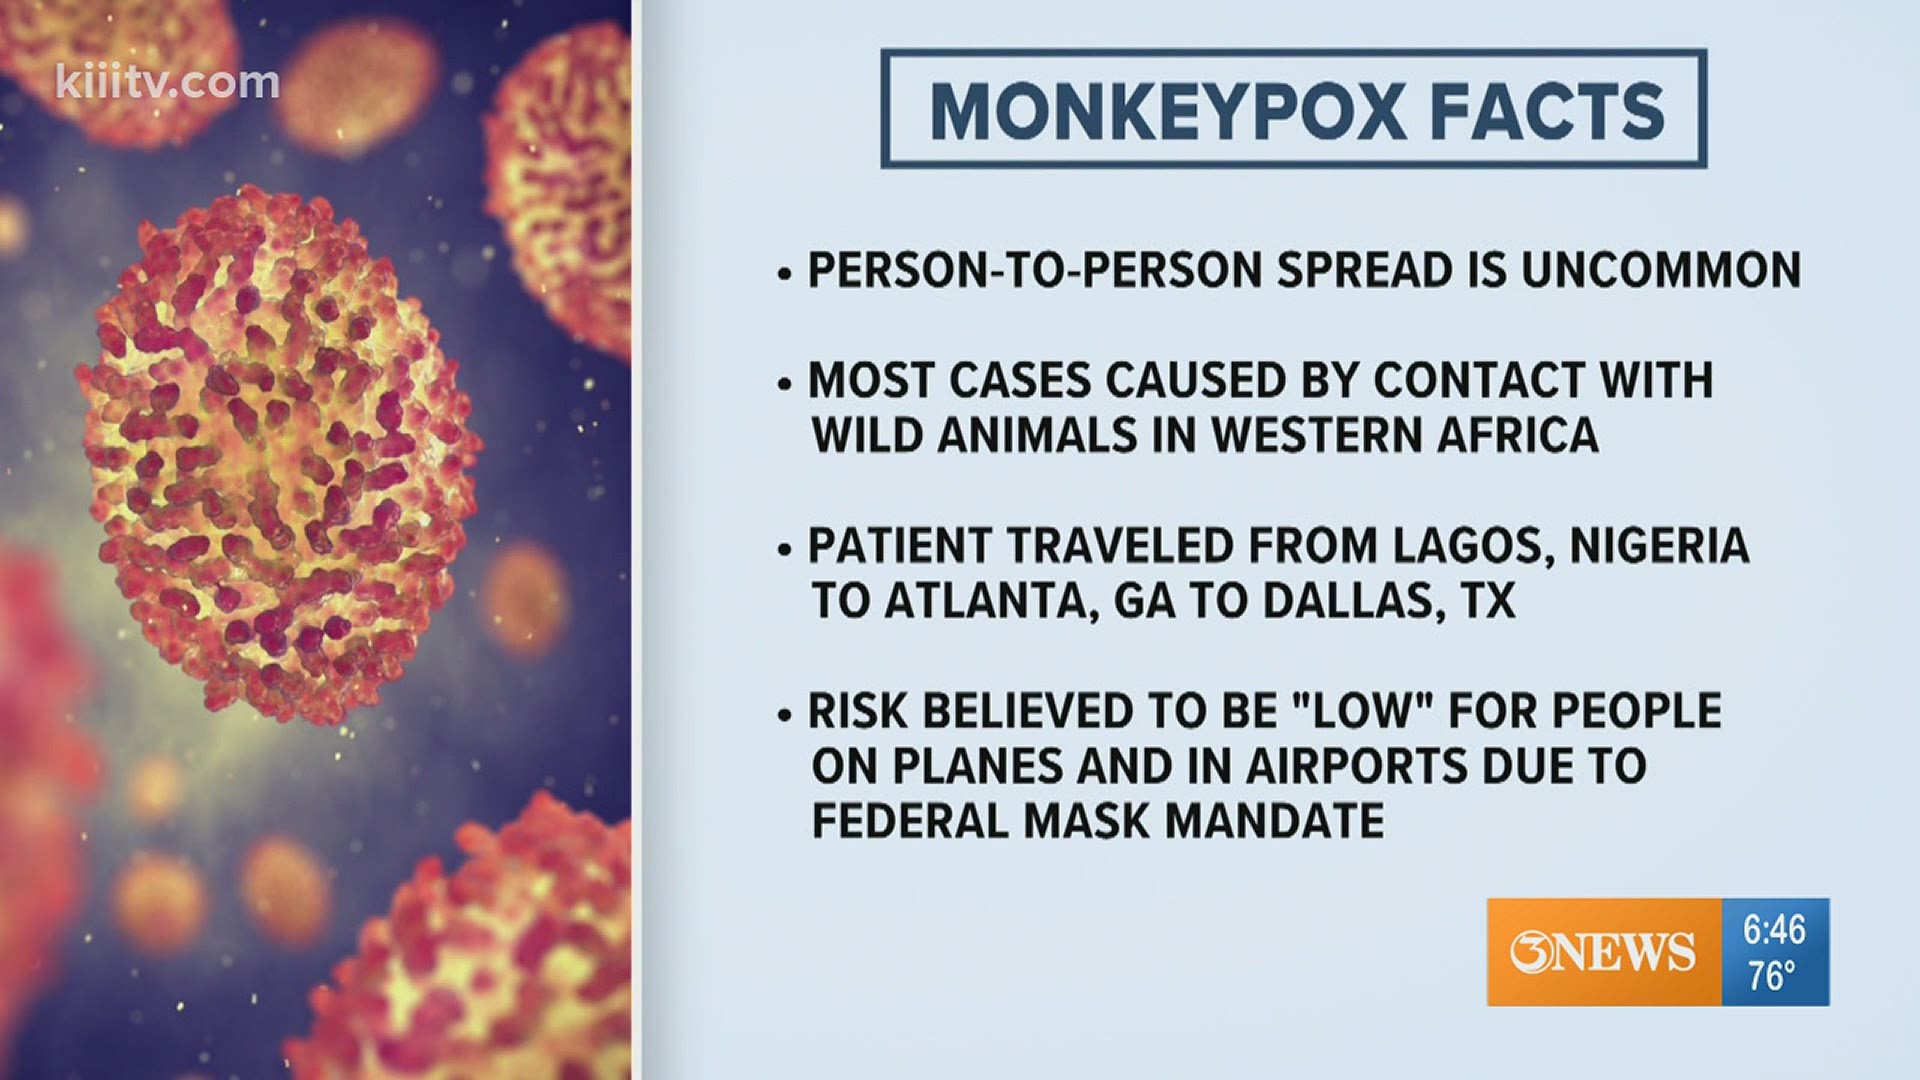 Dr. Silverman joined 3News to talk about monkeypox.